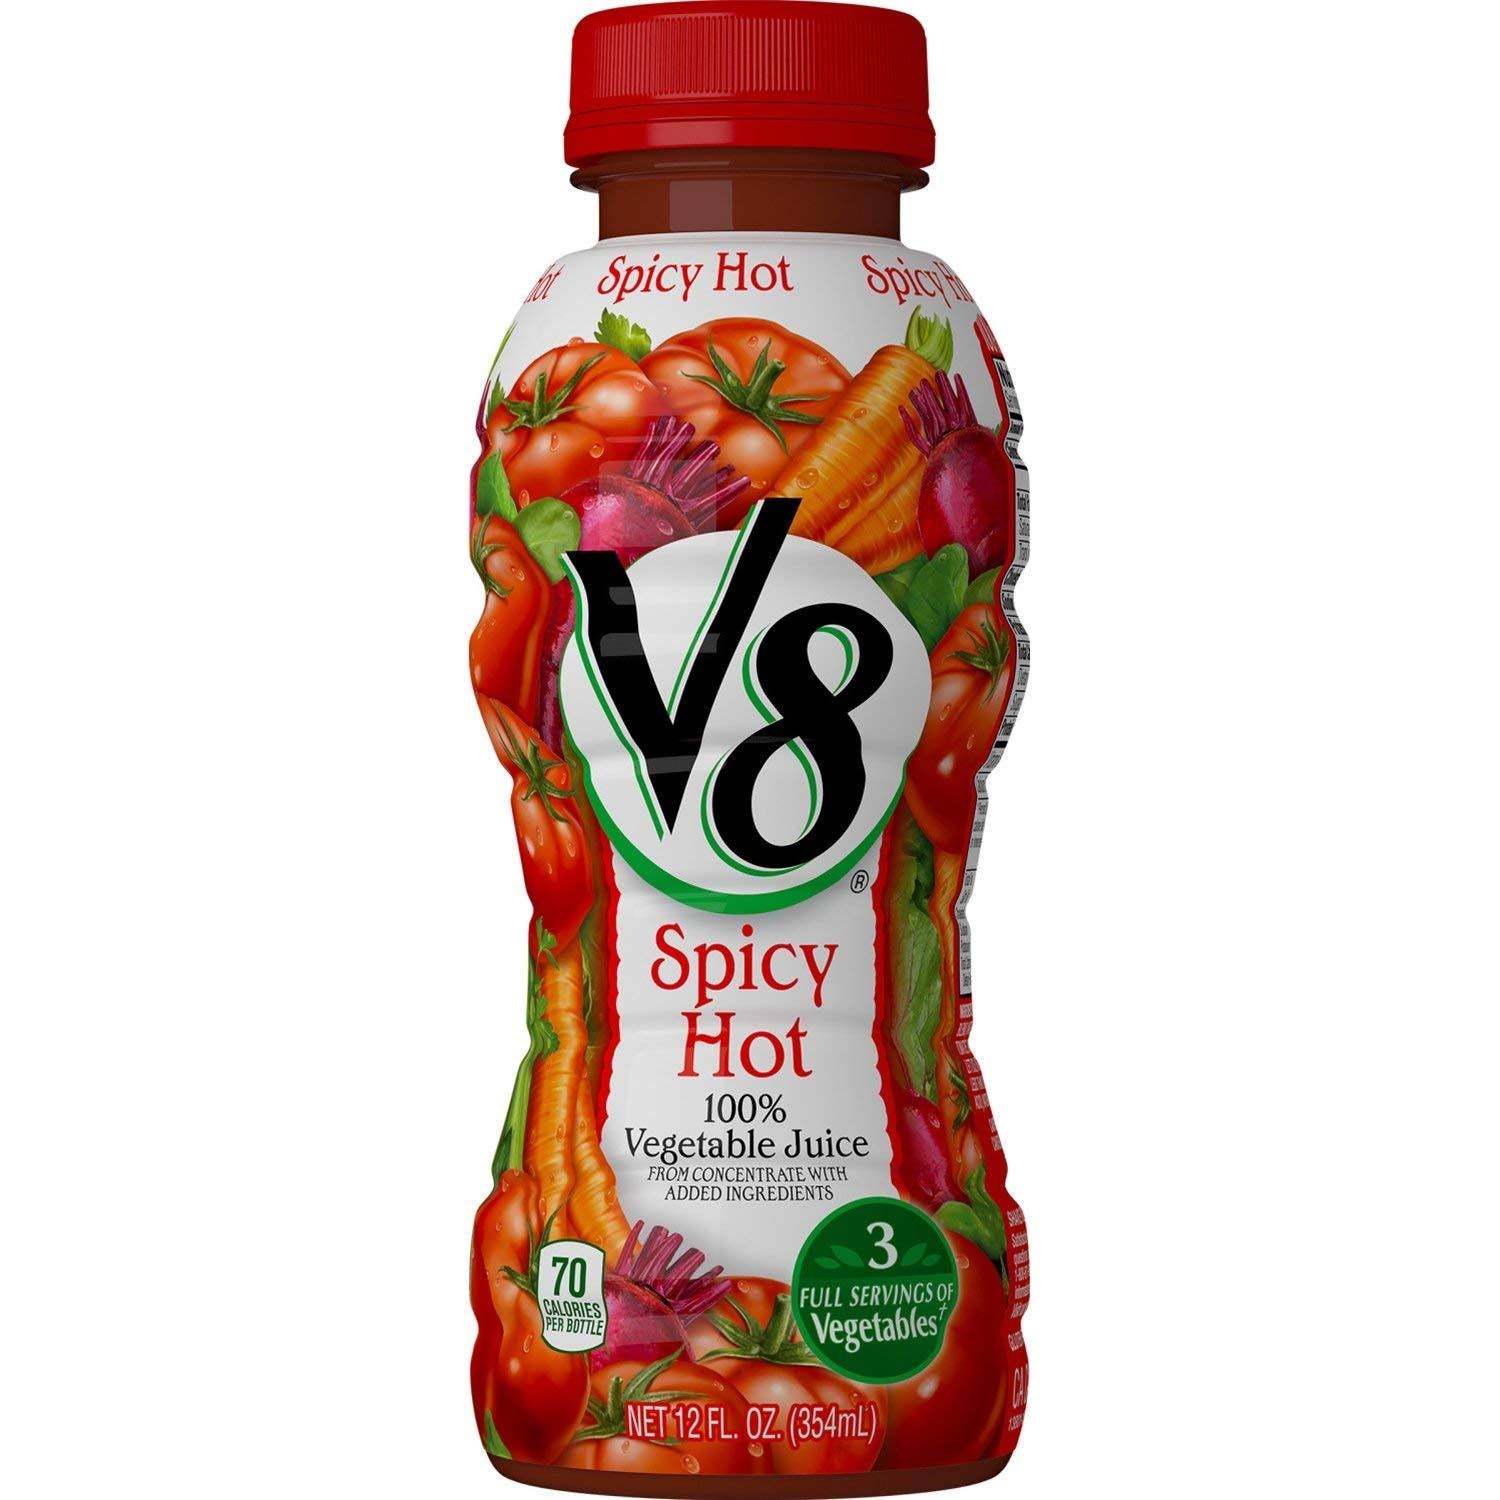 V8 Spicy Hot 100% Vegetable Juice, 350ml Bottle (Pack of 12) | Coffee, Tea & Espresso | Best Price Guarantee | Free Shipping on All Orders